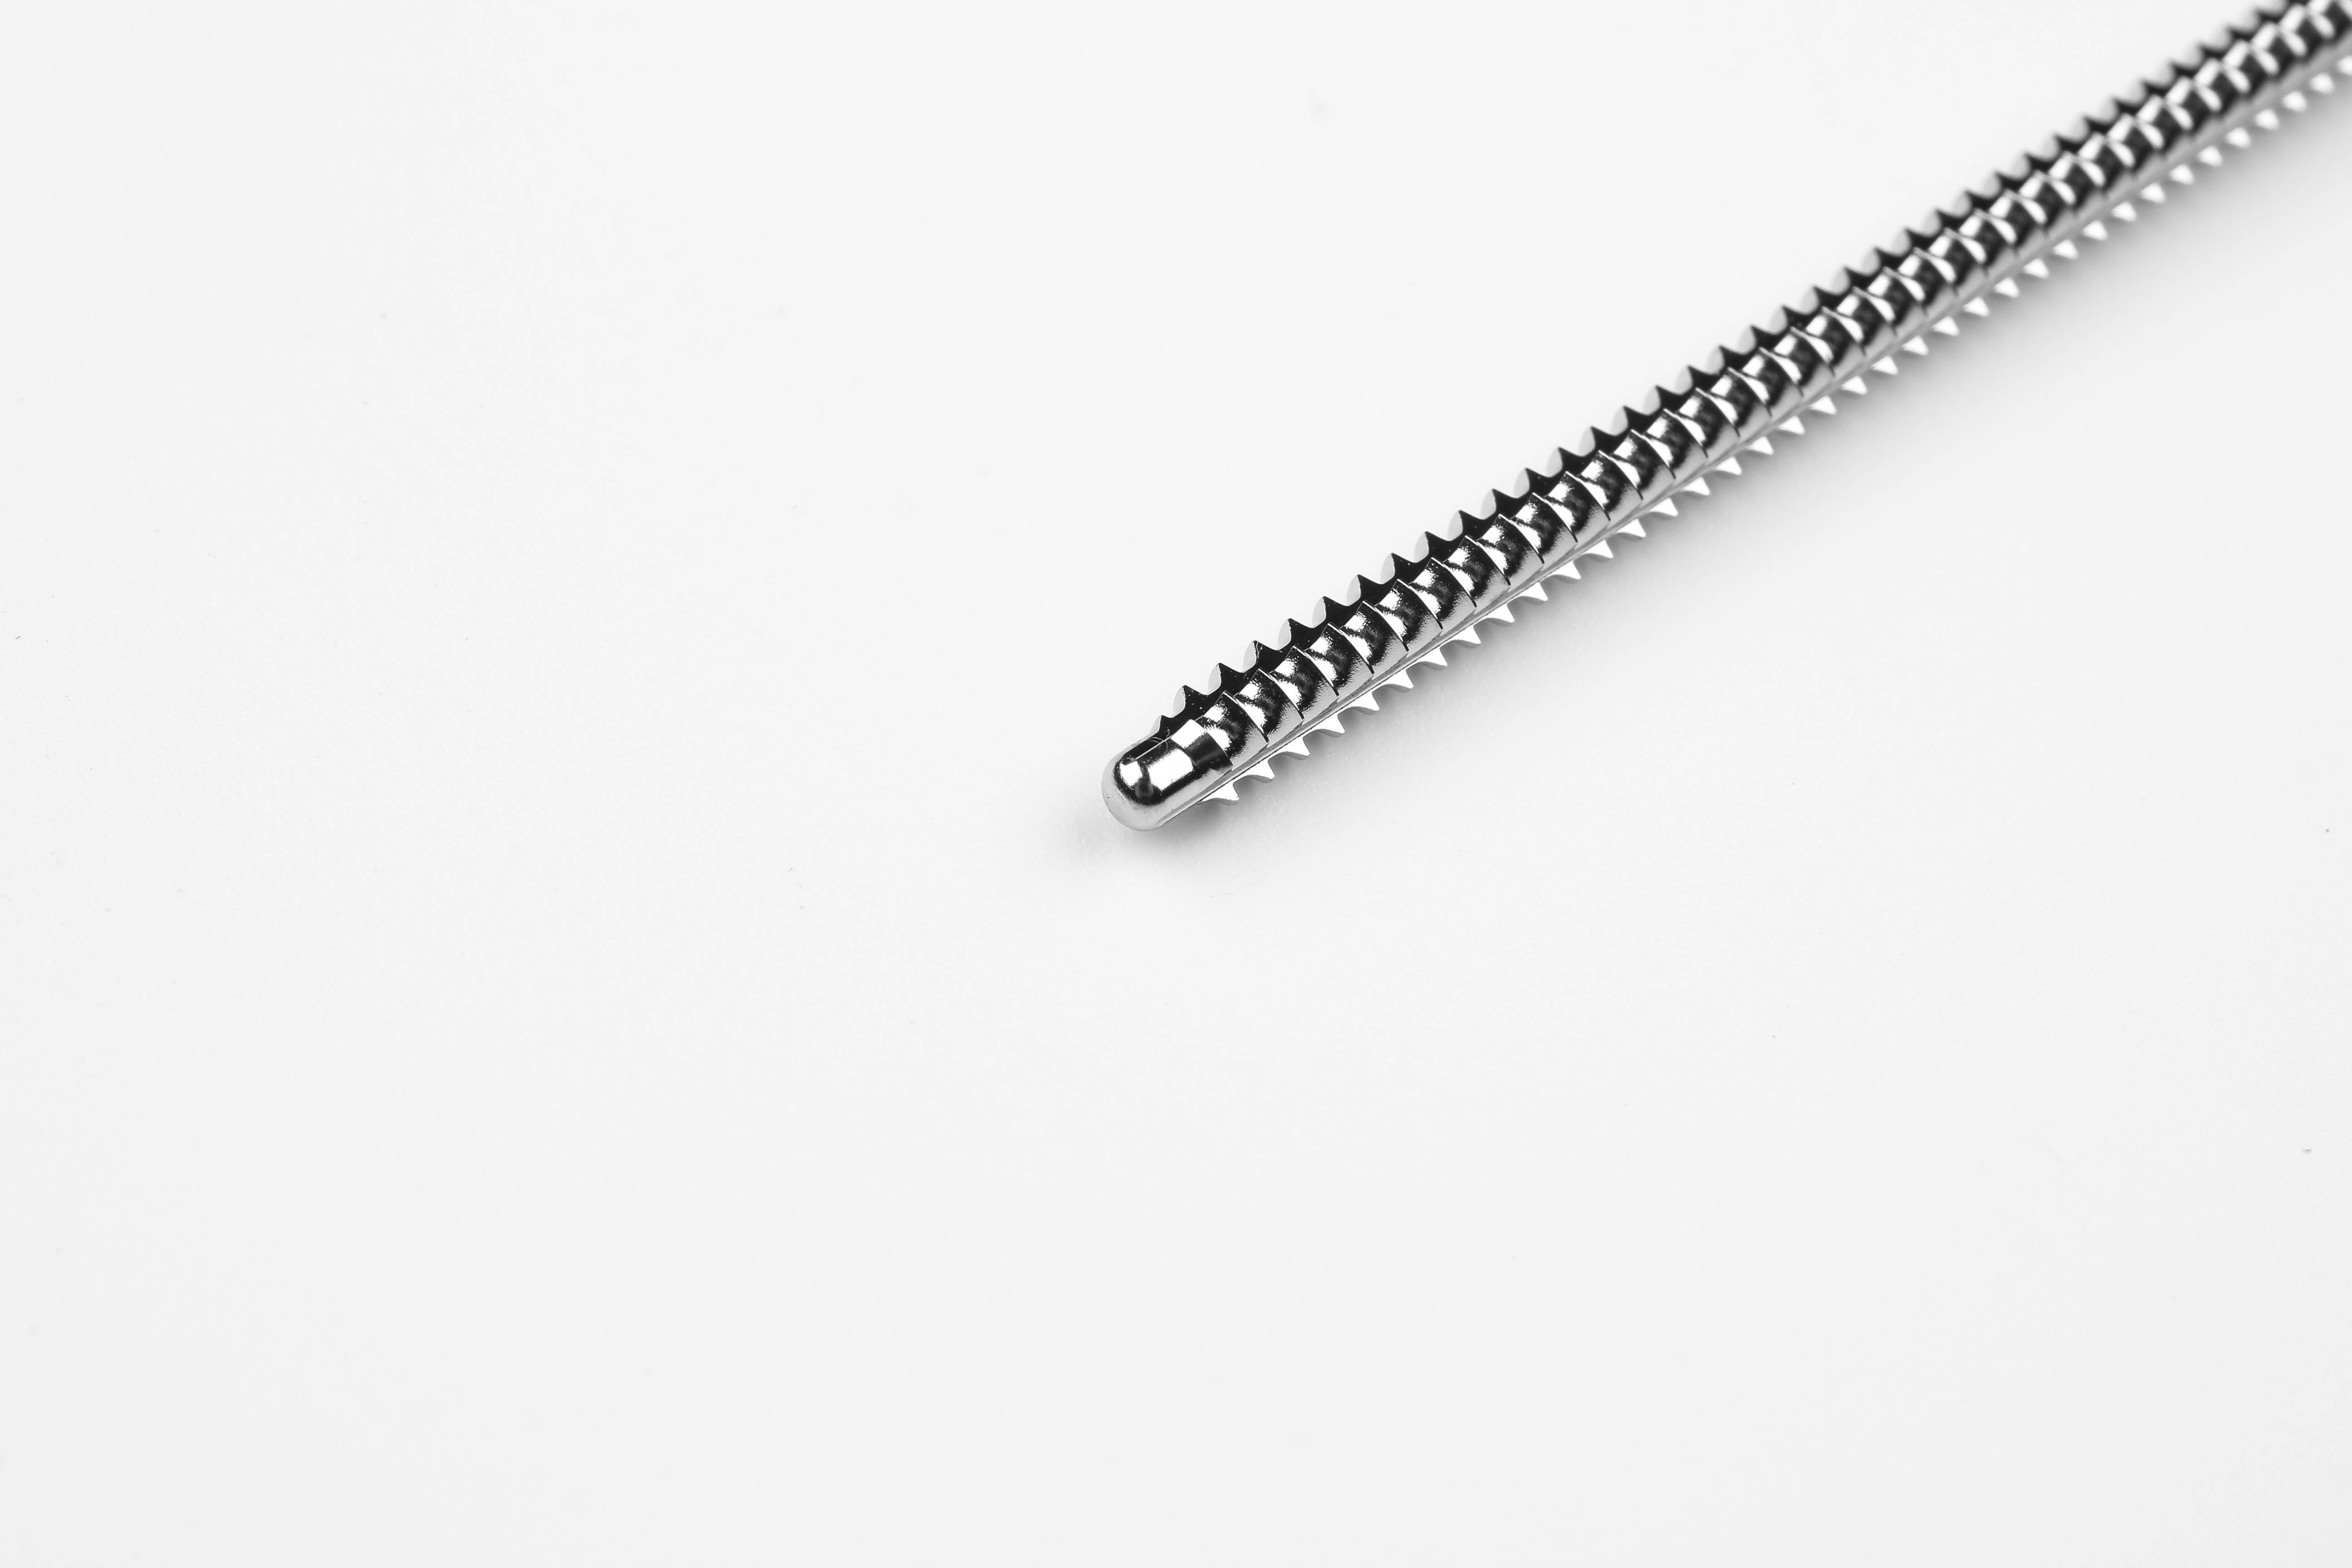 Orthopedic Surgical Screw Tap OEM(Non standard product)